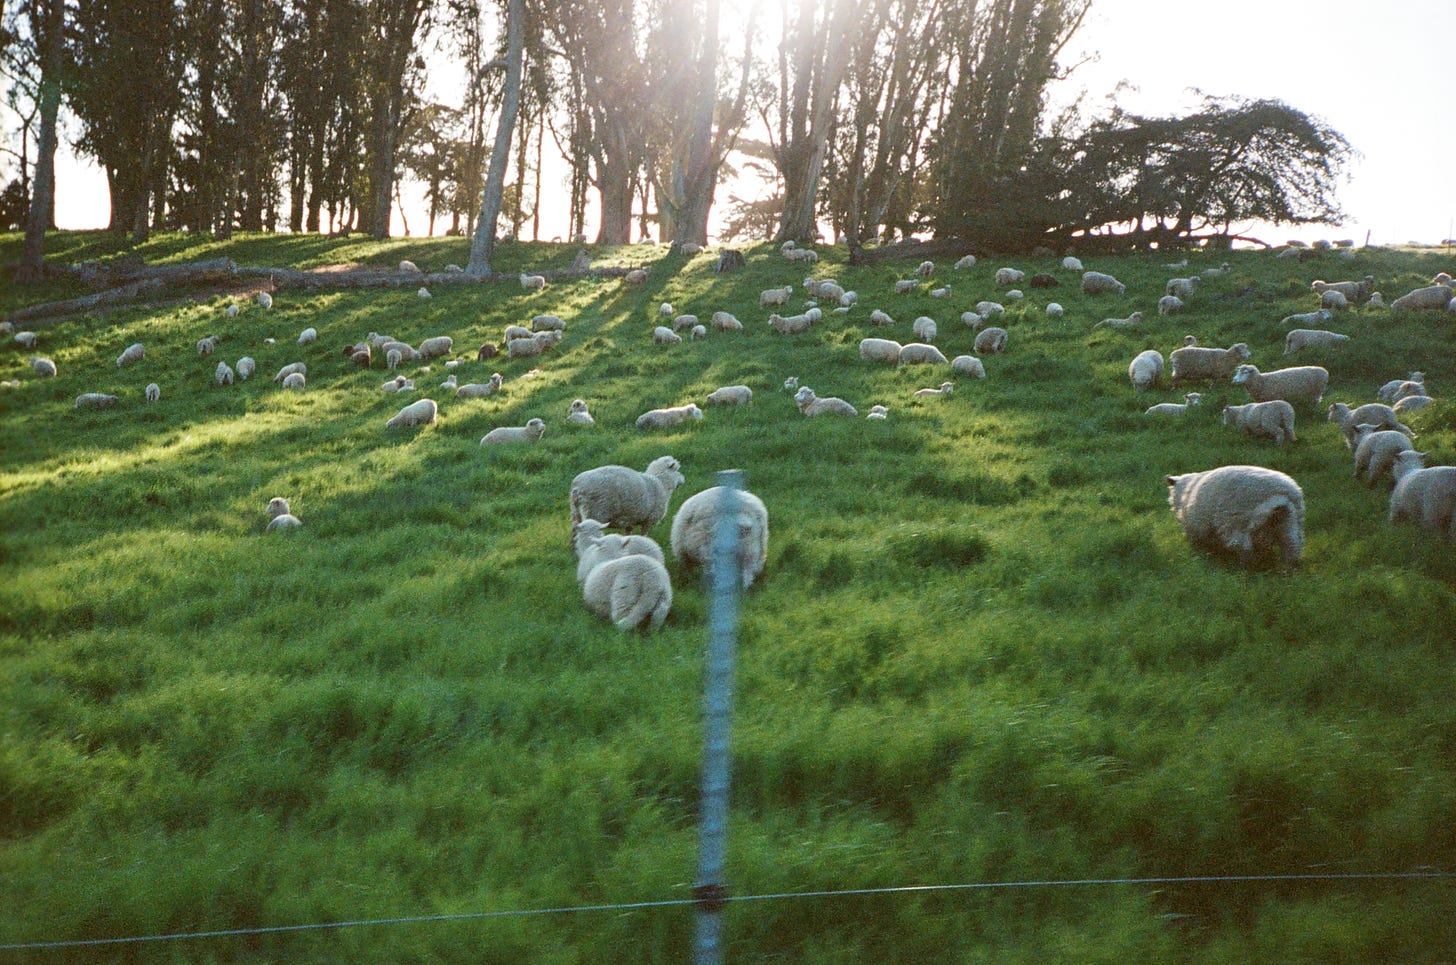 Sheep grazing the Stemple Creek pasture